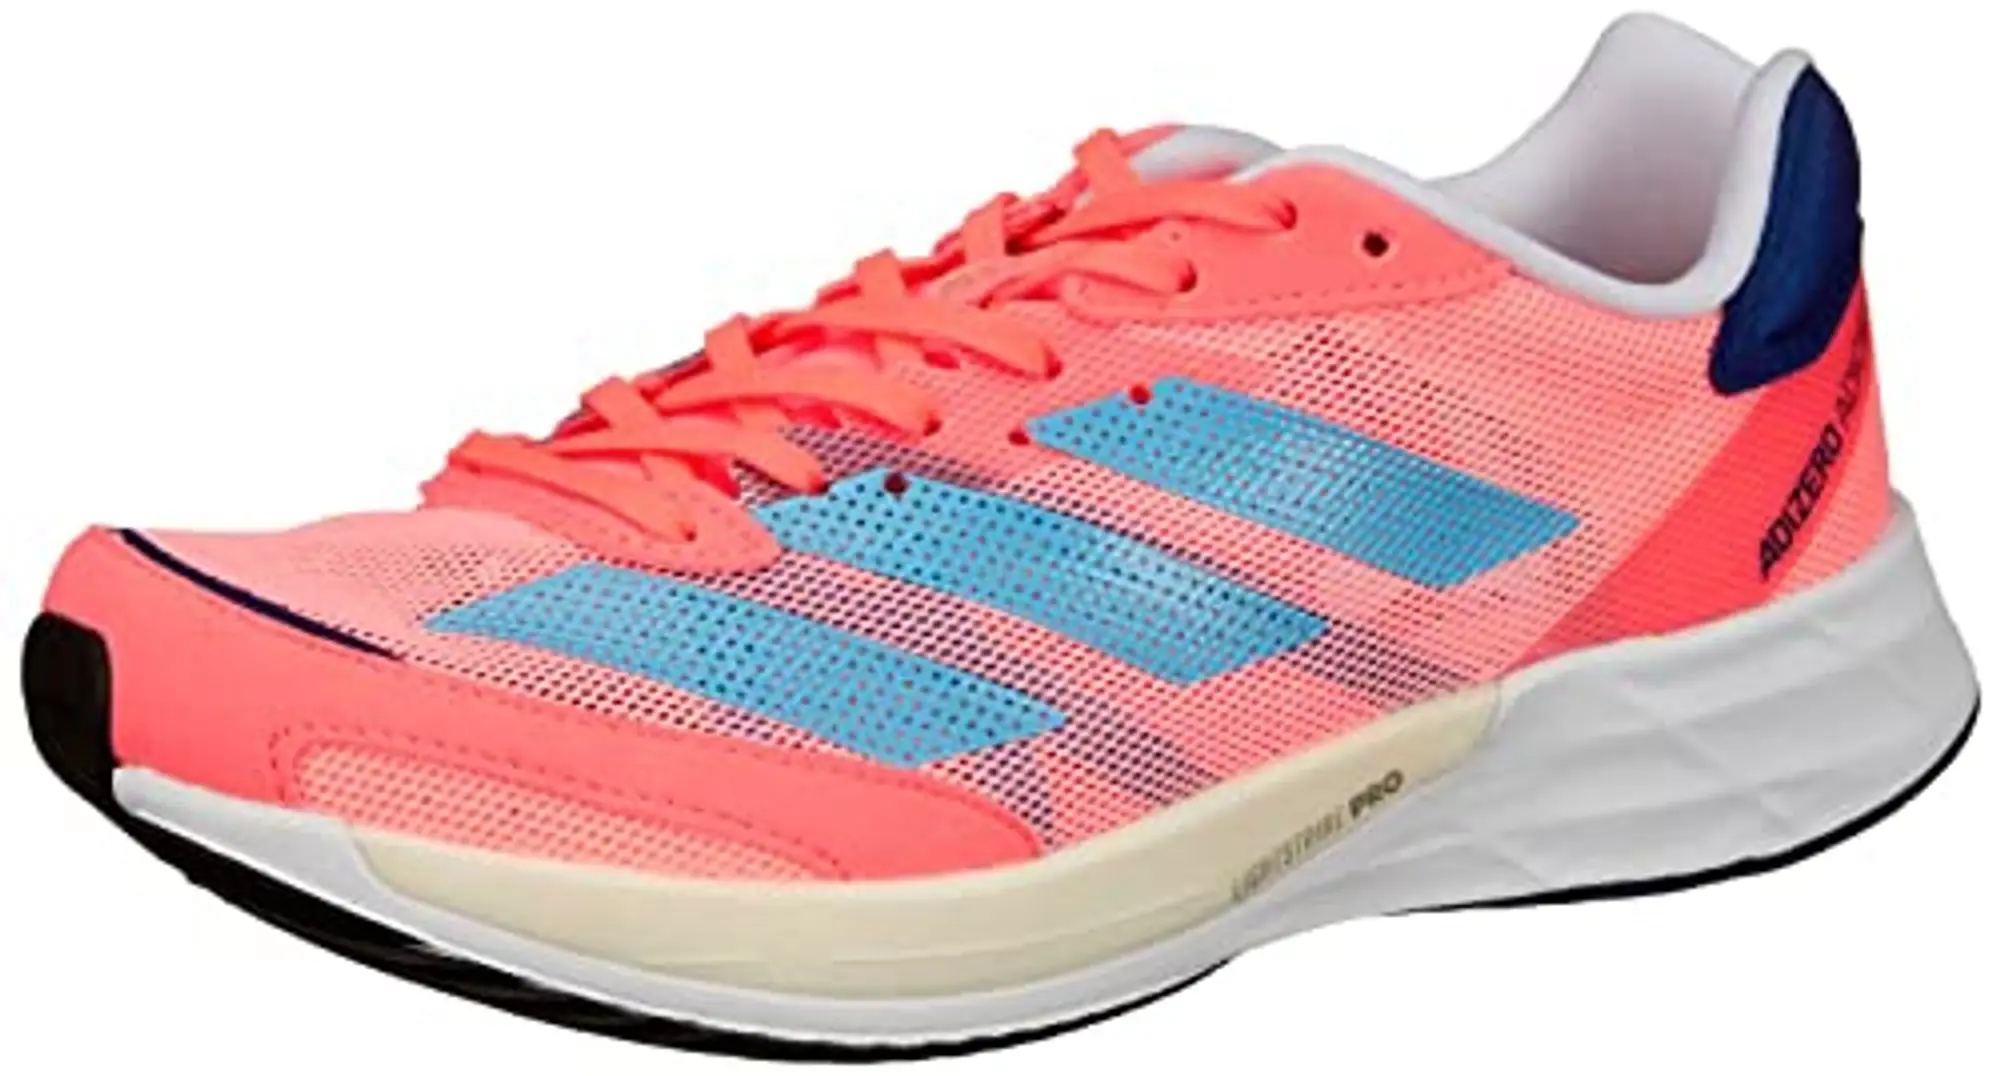 adidas Womenss Adizero Adios 6 Running Shoes in Pink Textile